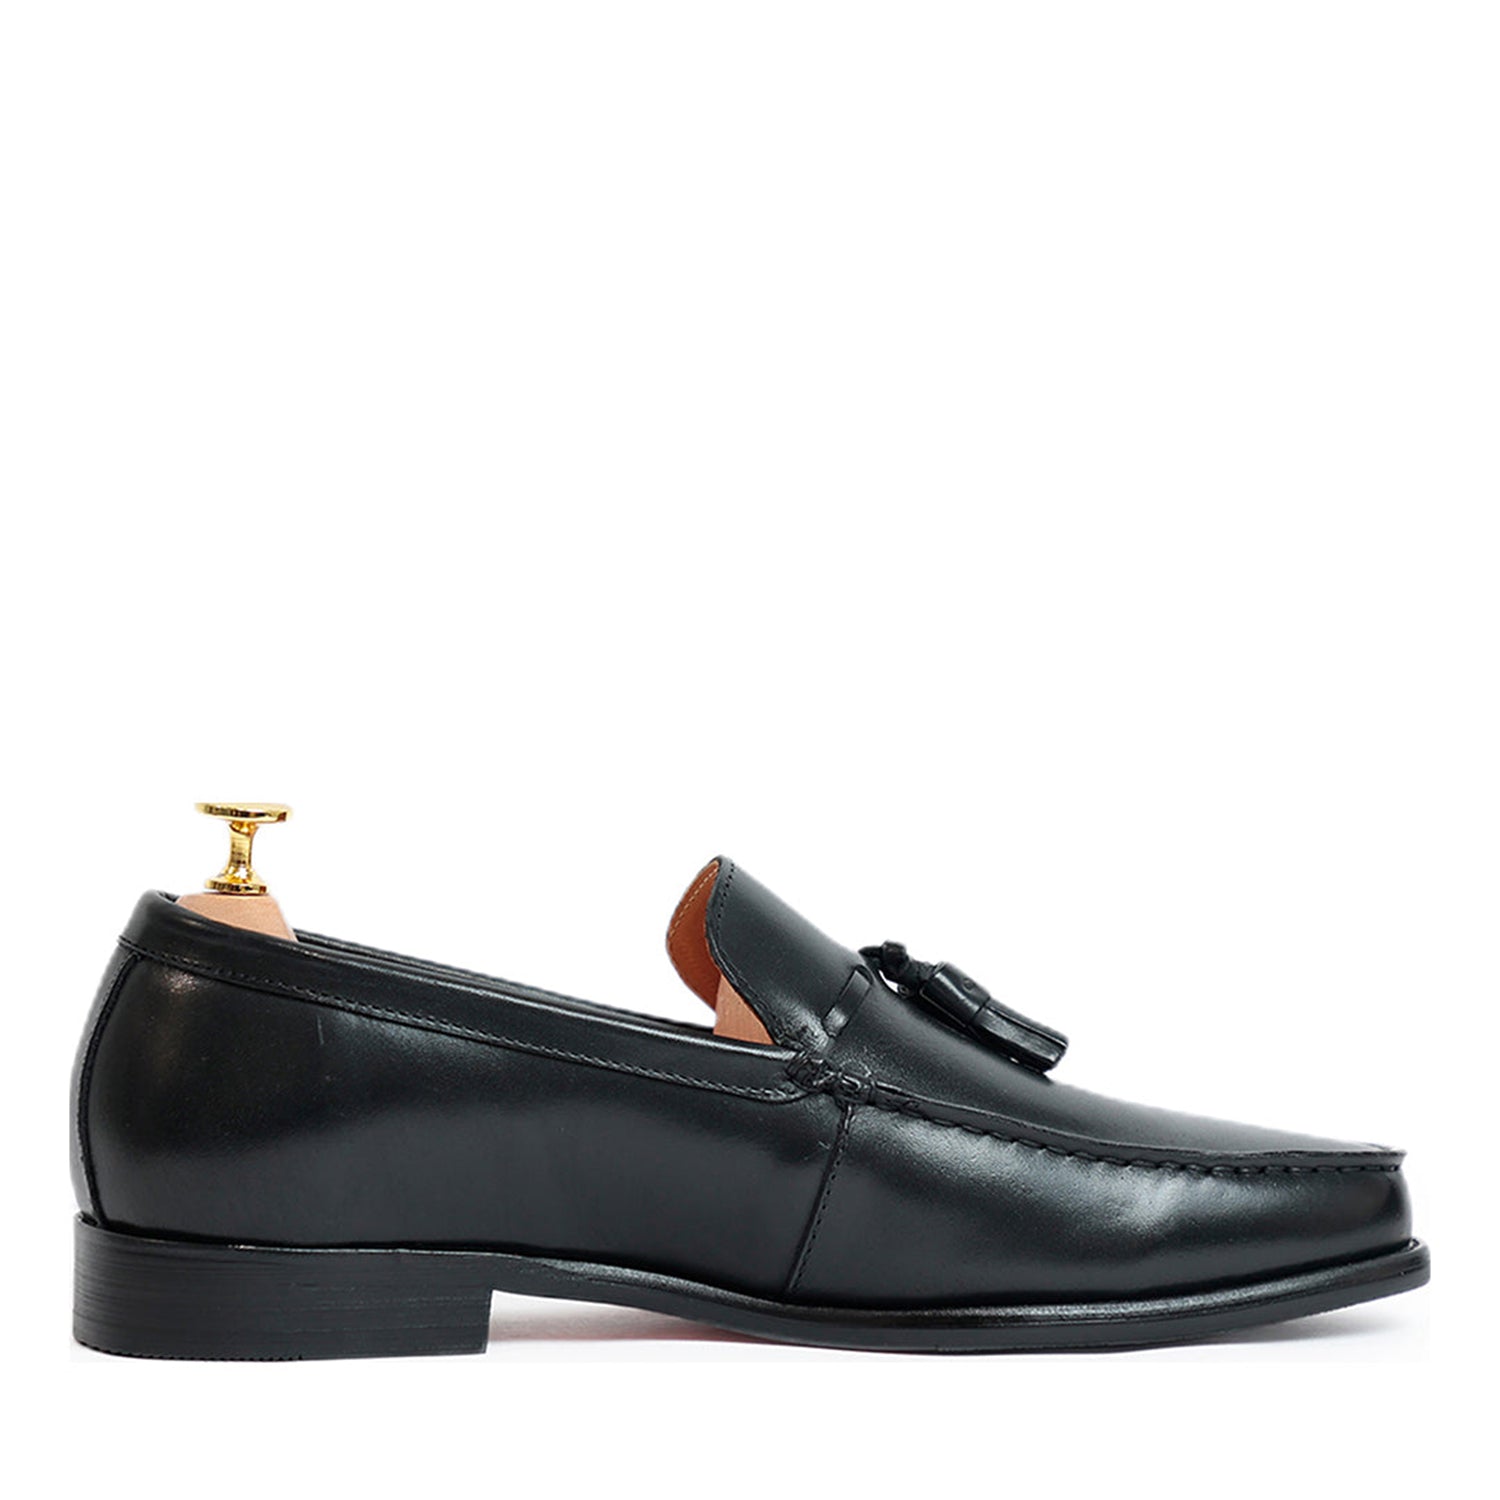 Selton Brown Loafer shoes